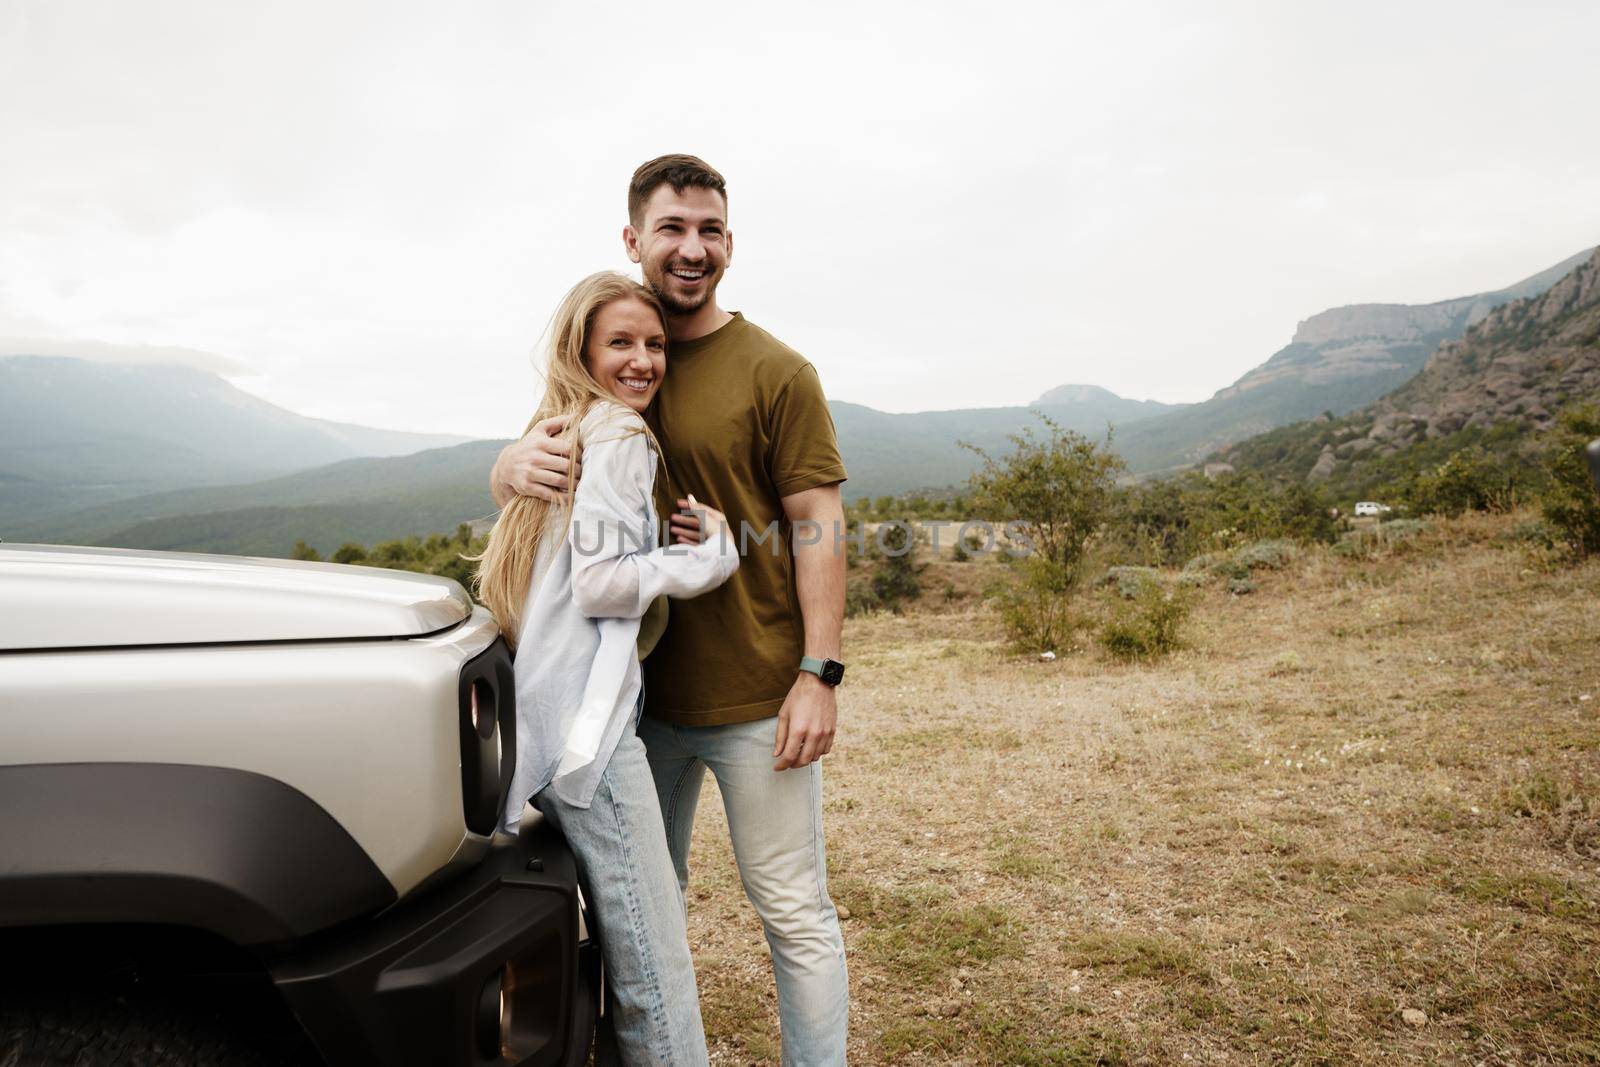 Young couple is on romantic trip to the mountains by car, close up